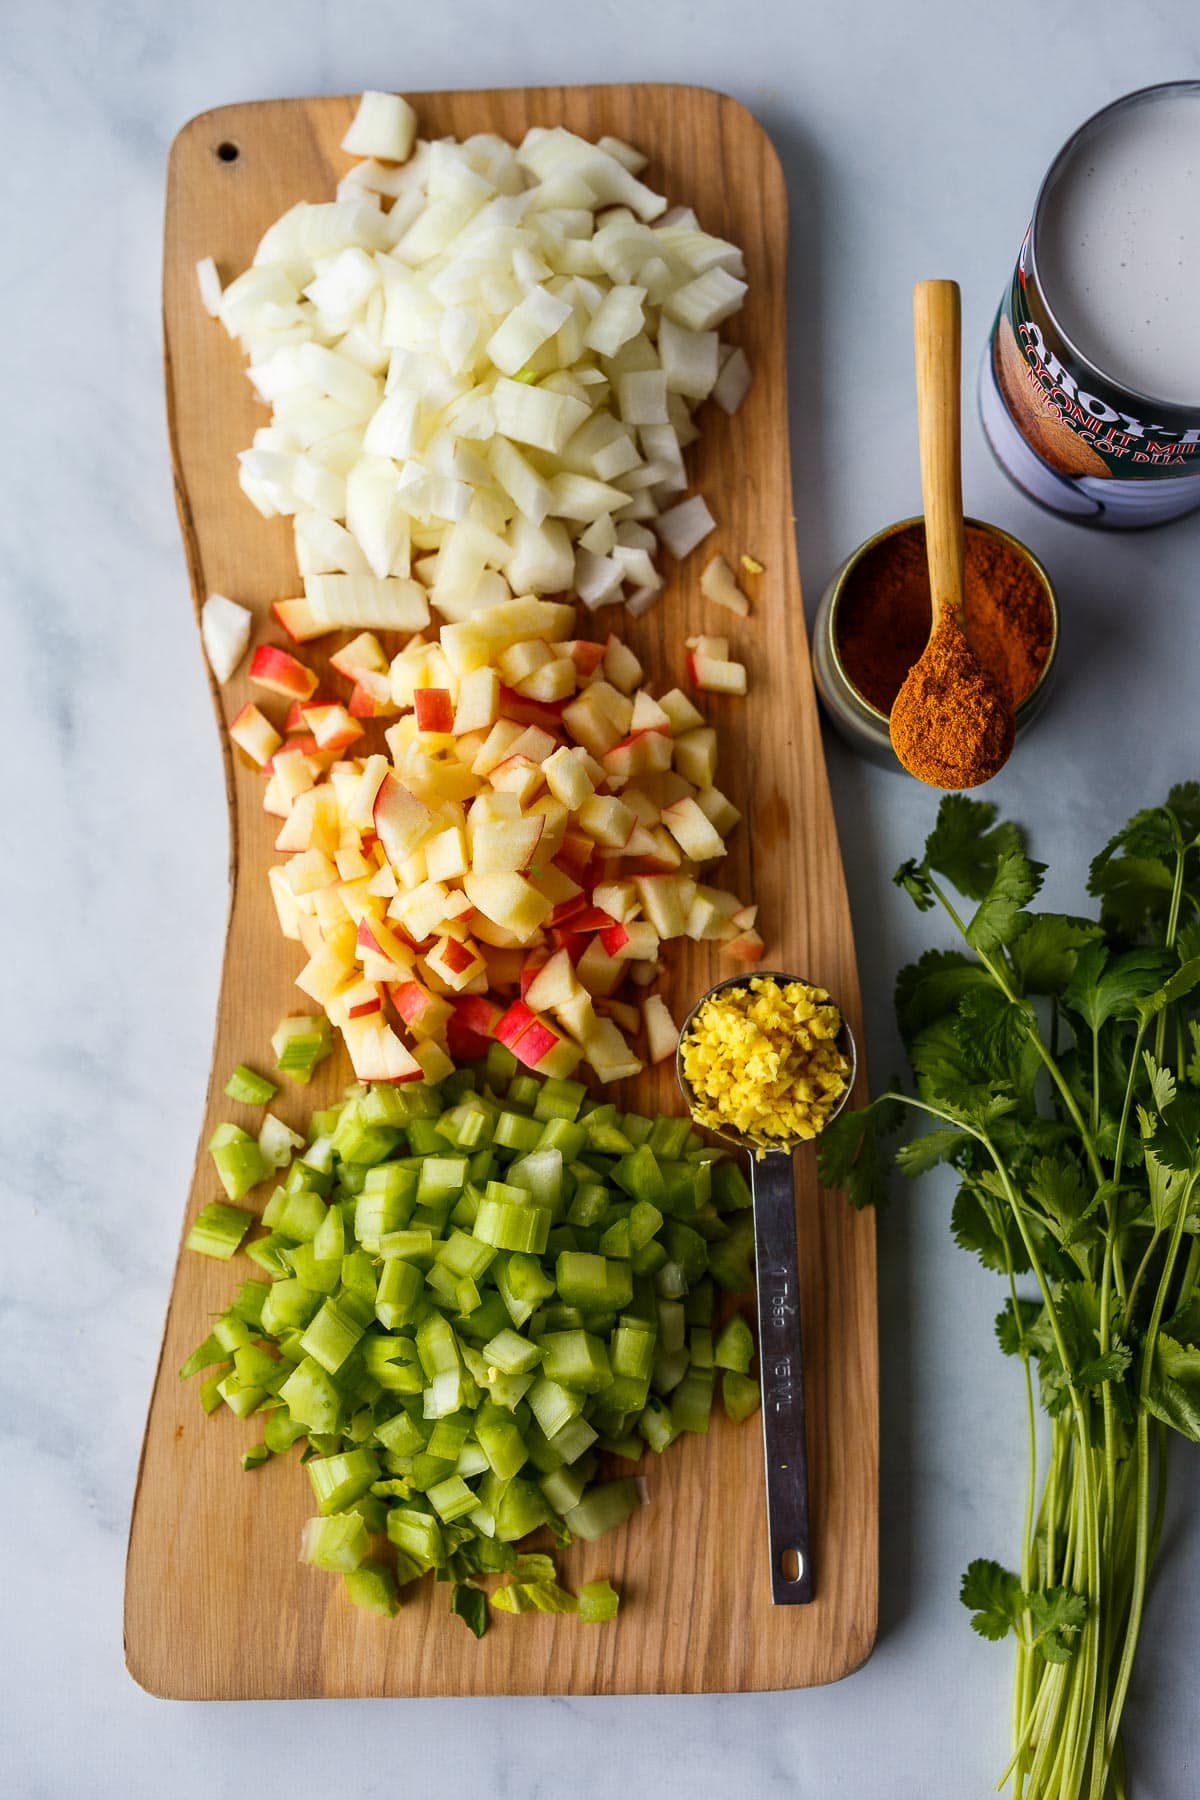 Chopped ingredients on a cutting board.